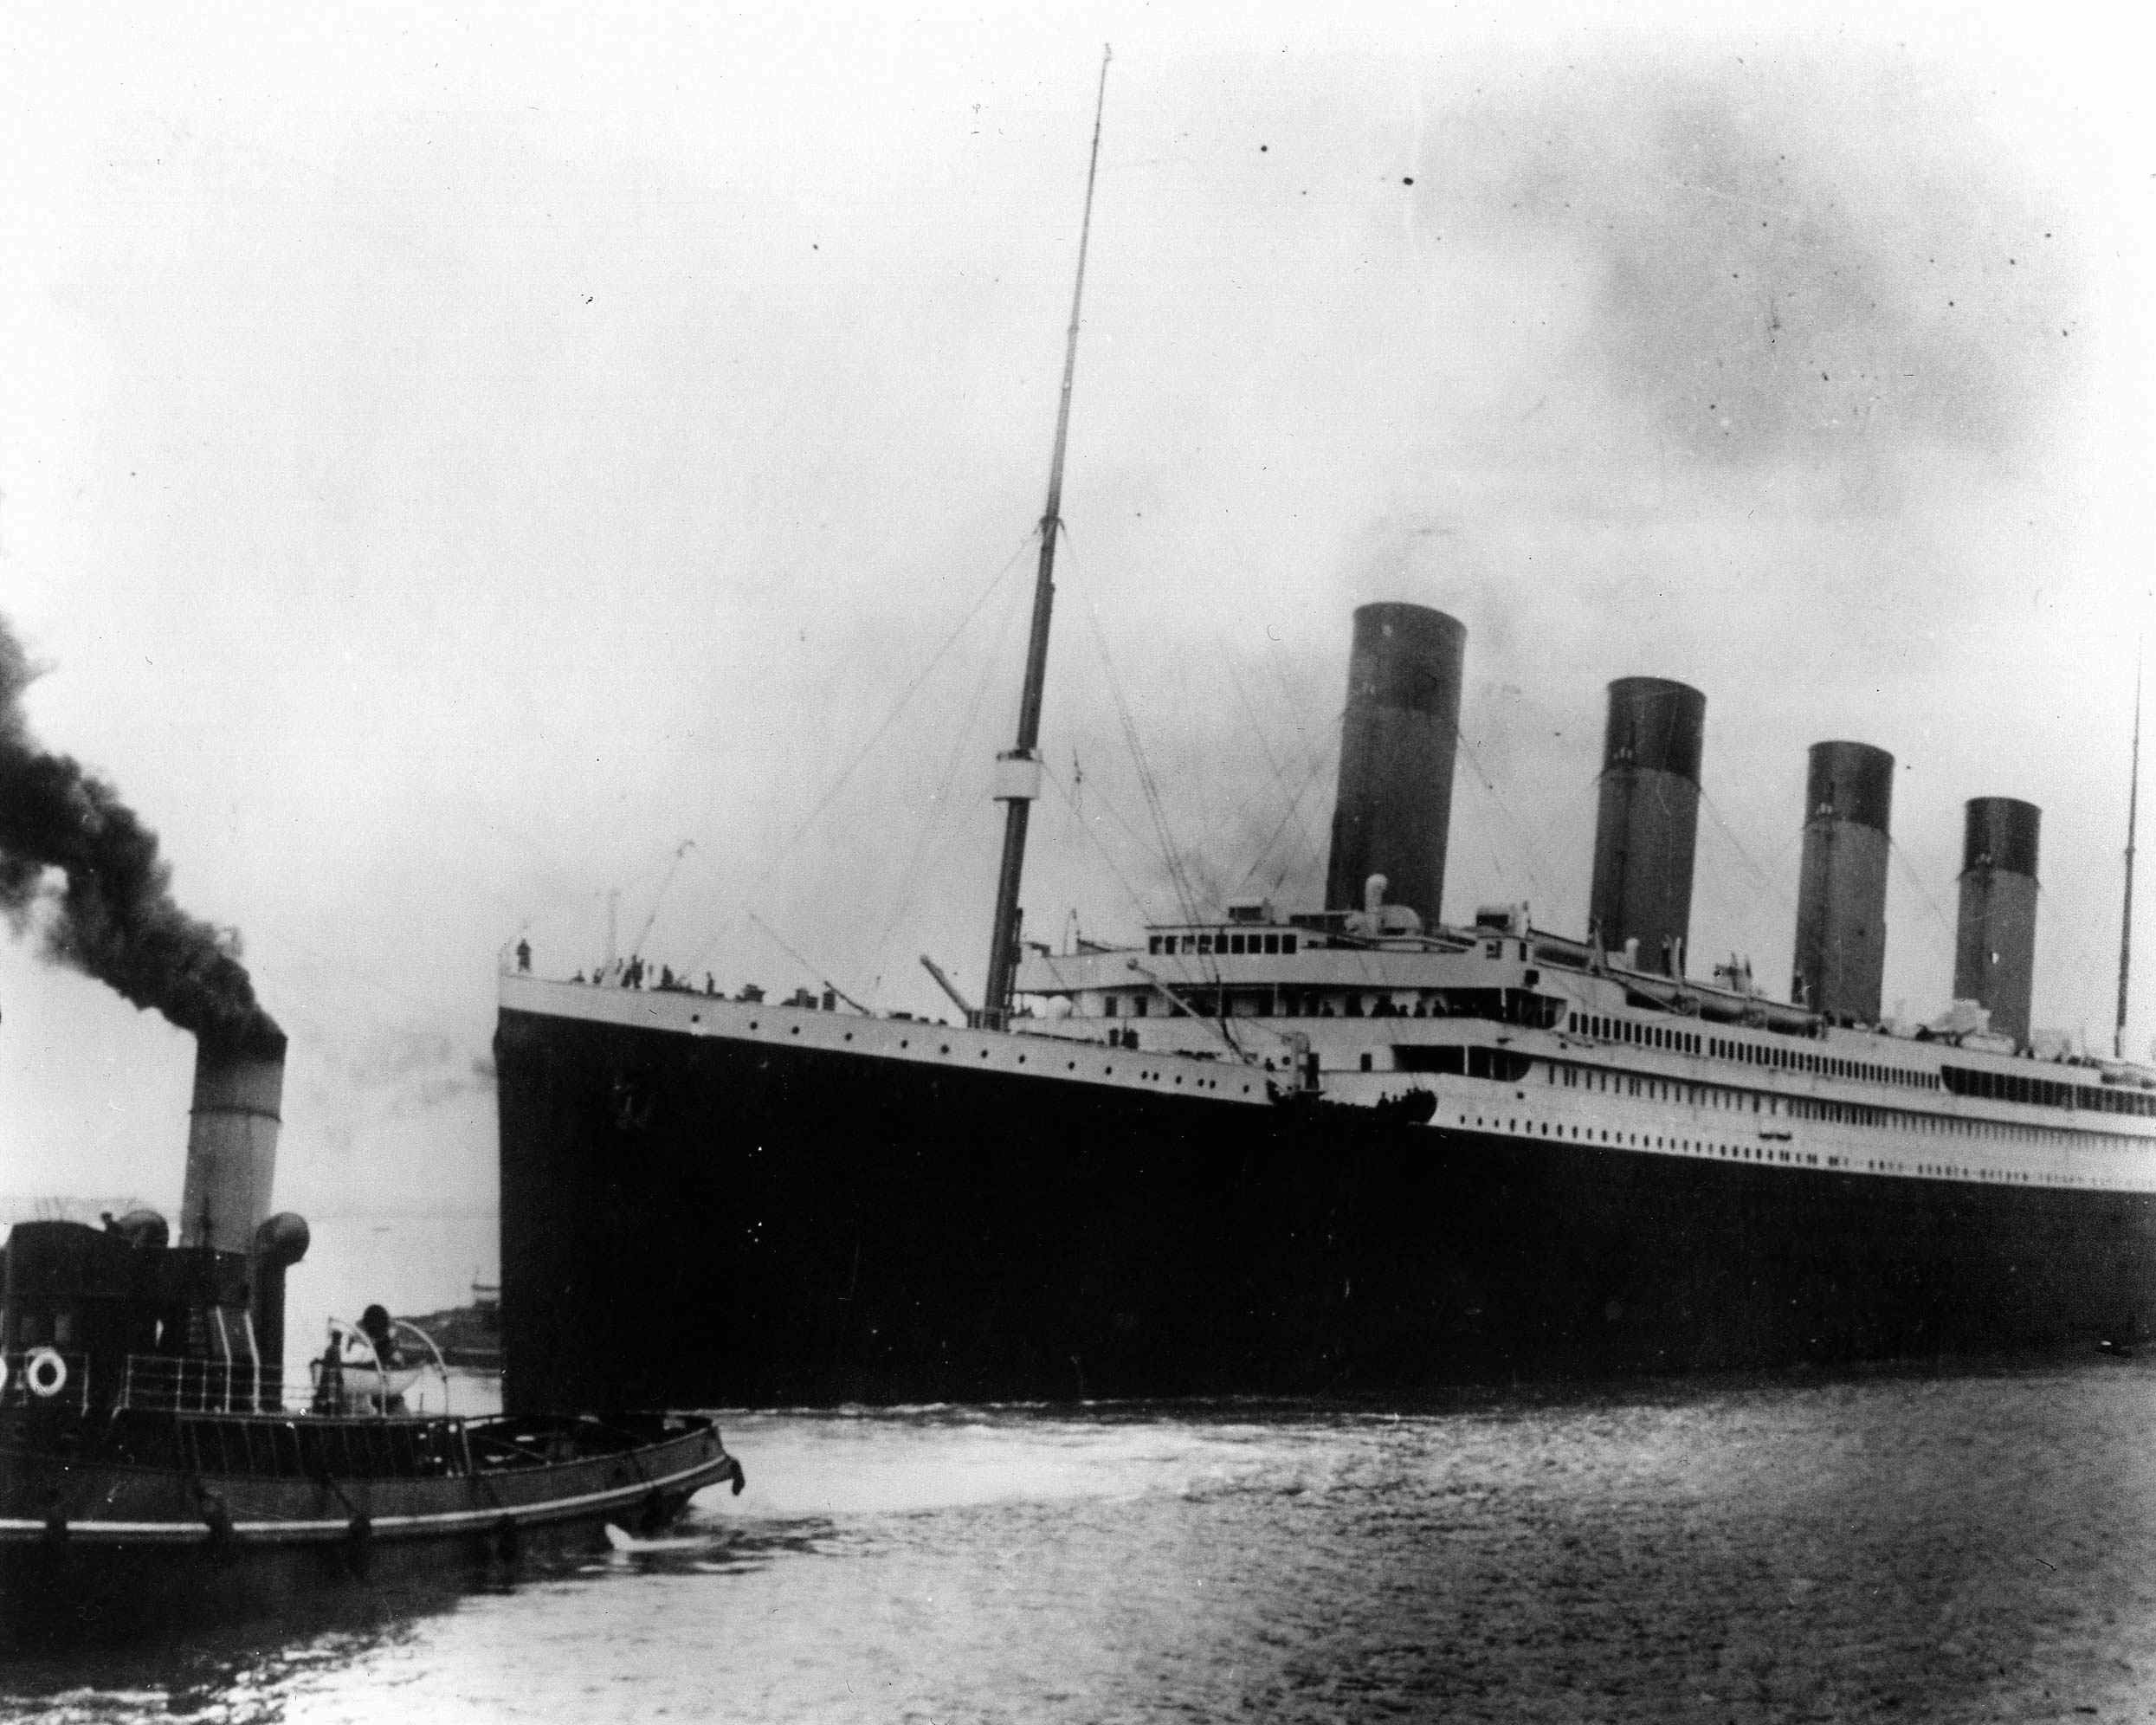 The men … remained to die': The sinking of the . Titanic in 1912 -  